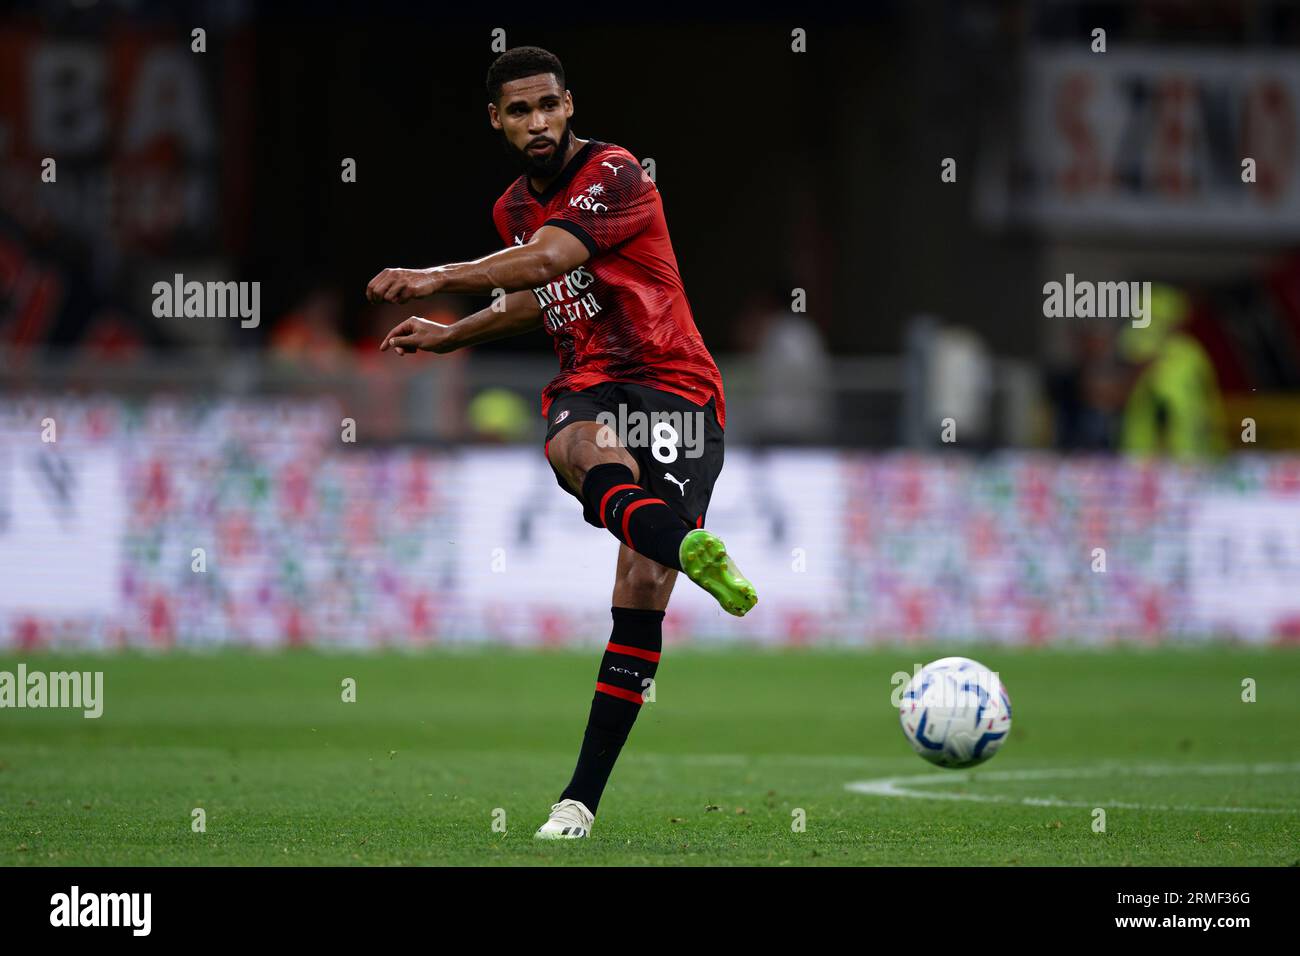 Ruben Loftus-Cheek of AC Milan in action during the Serie A football match between AC Milan and Torino FC. Stock Photo